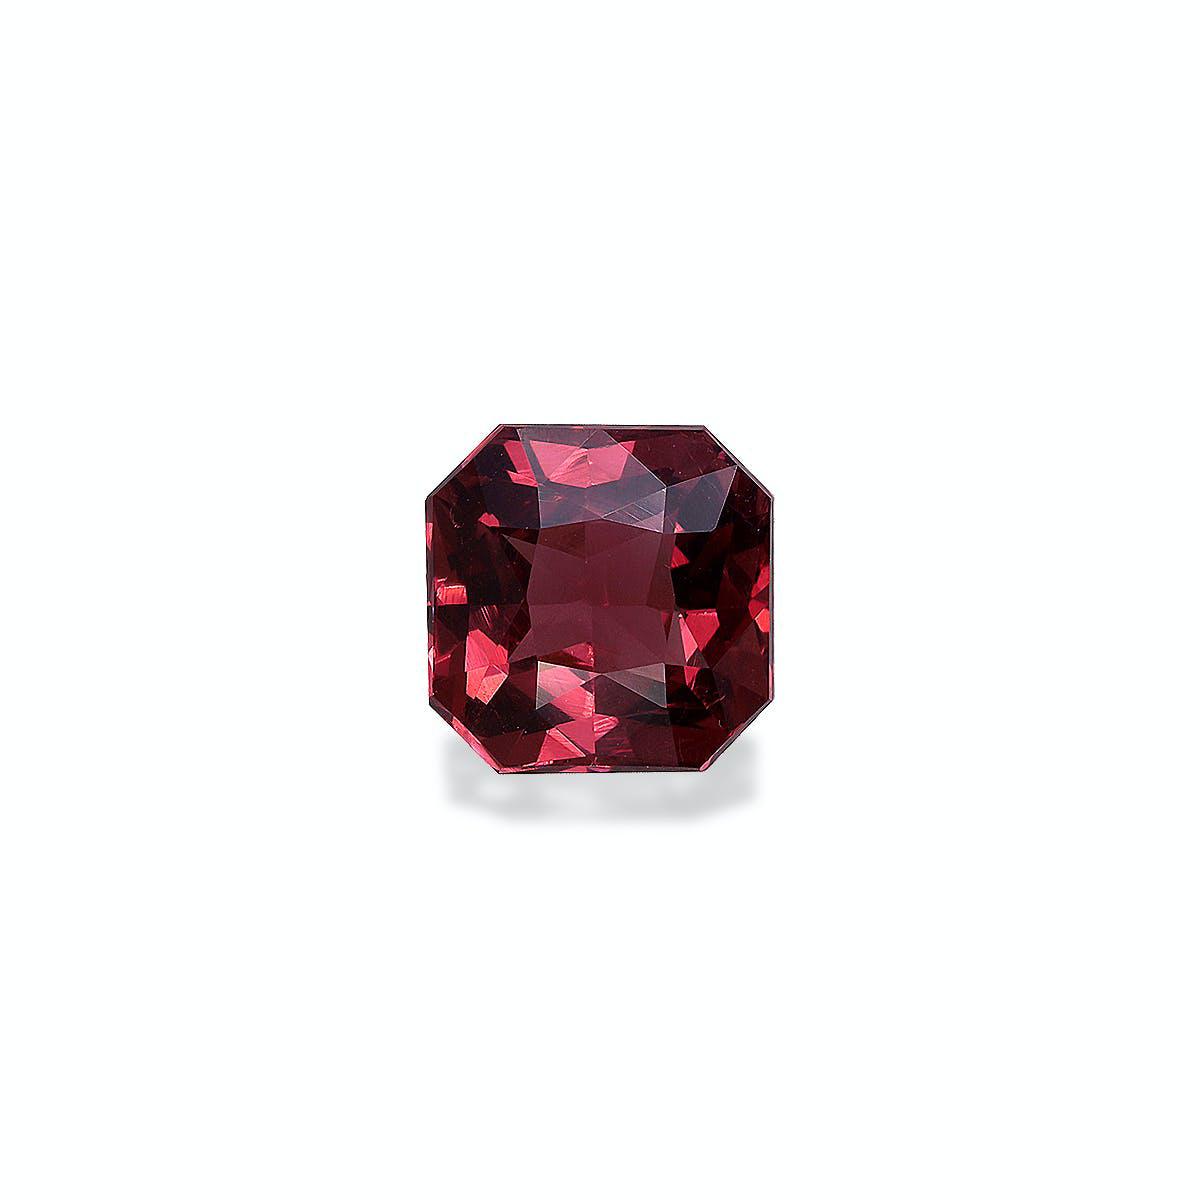 Picture of Orange Spinel 2.00ct - 7mm (SP0384)